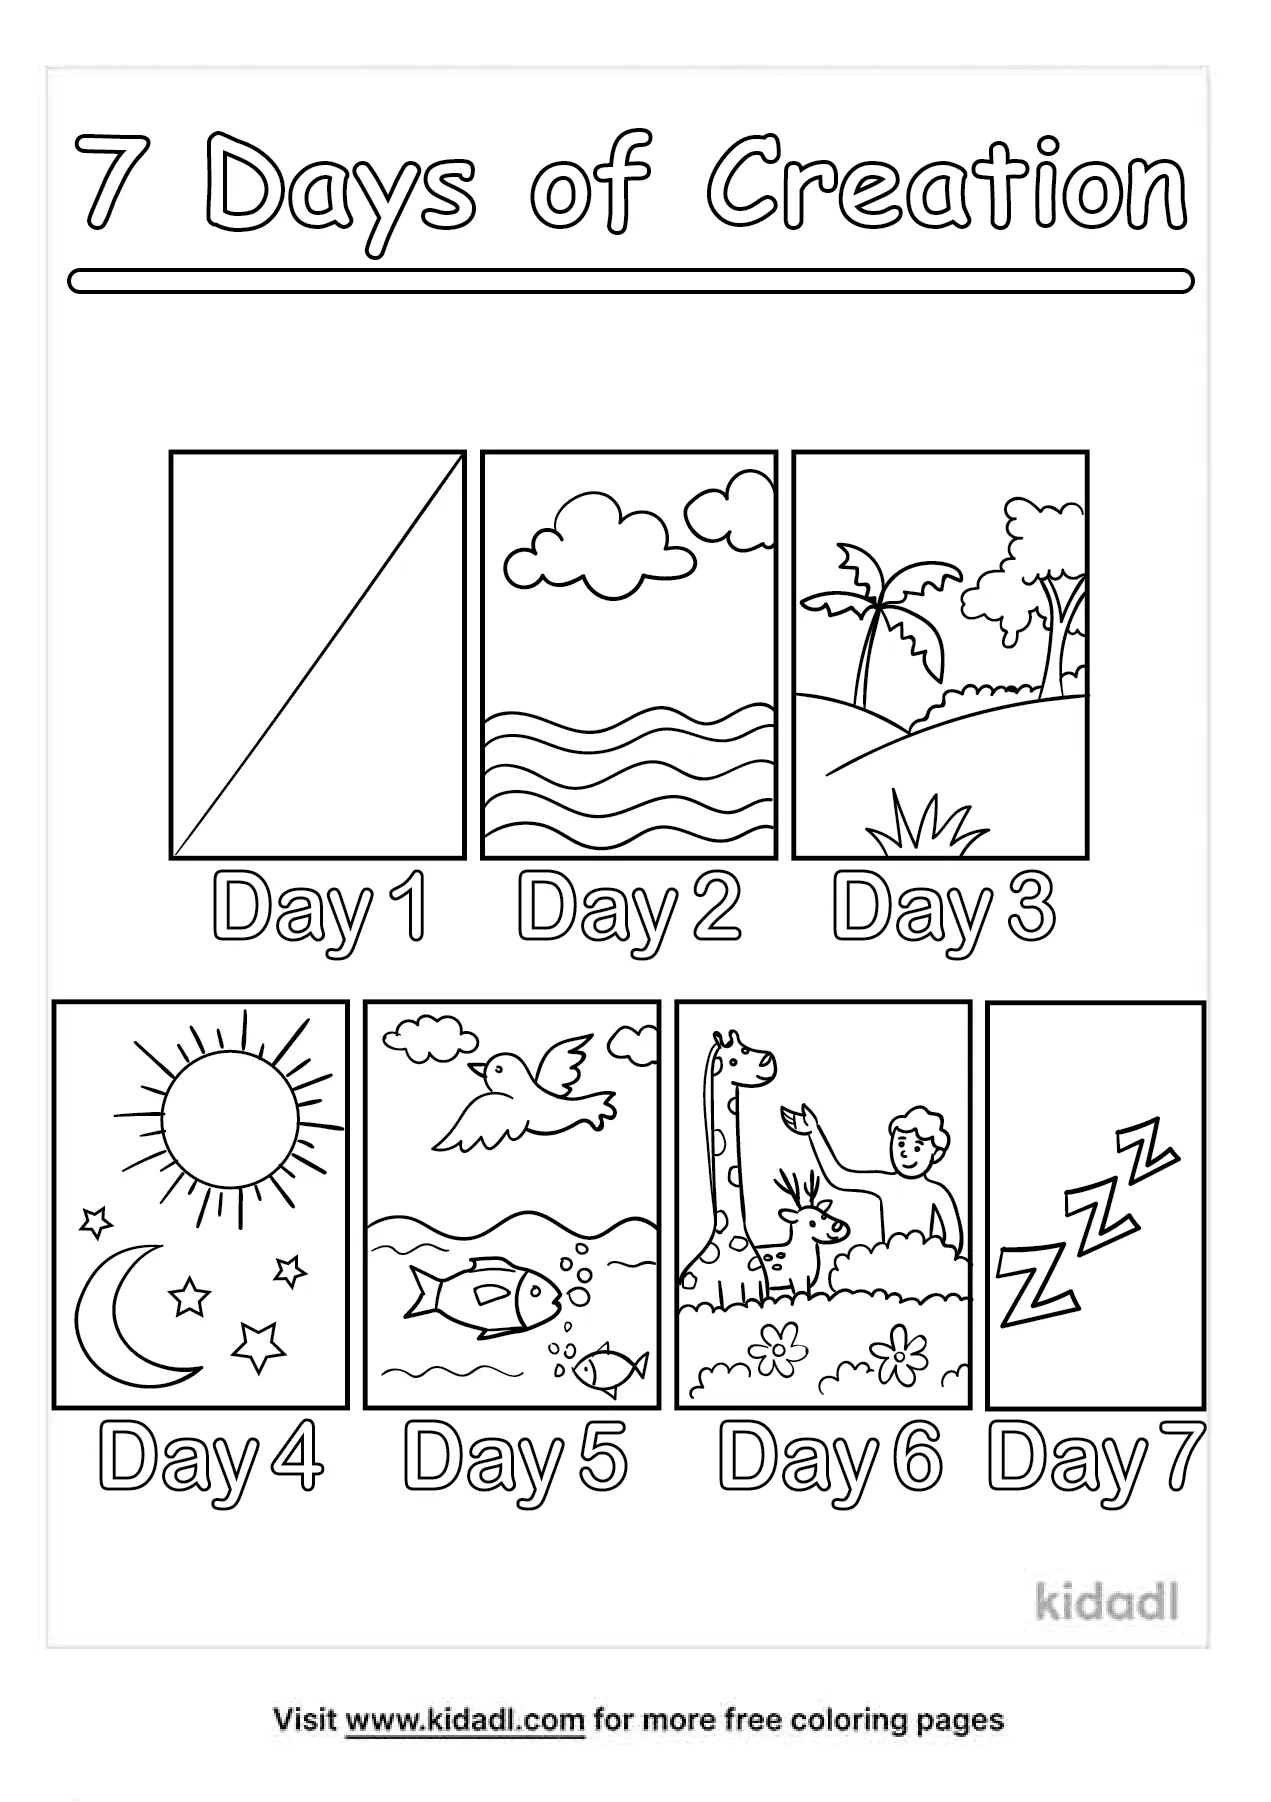 7 Days Of Creation Coloring Pages Free Bible Coloring Pages Kidadl